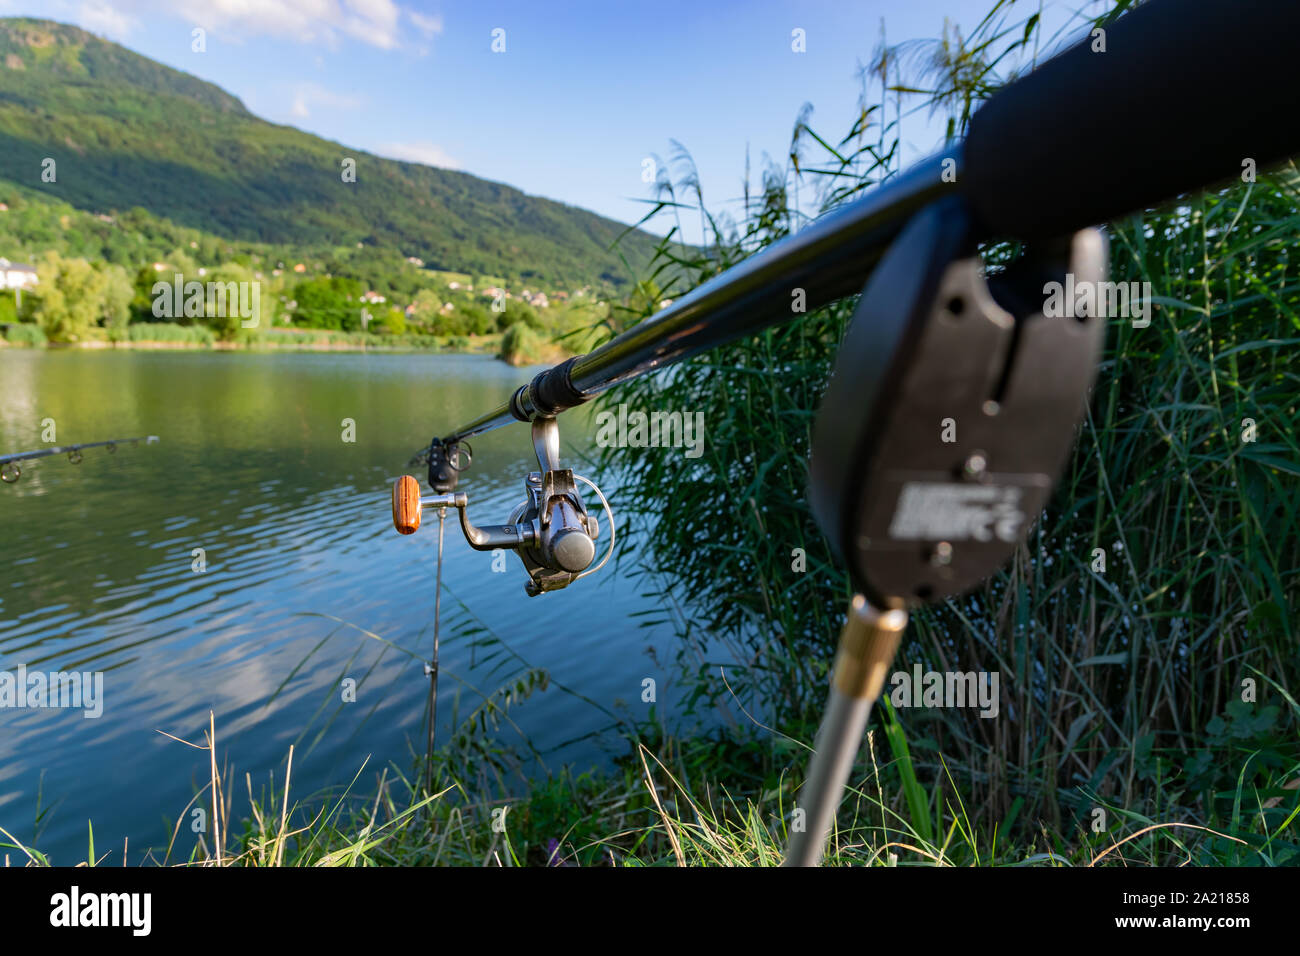 https://c8.alamy.com/comp/2A21858/closeup-of-a-reel-fishing-rod-on-a-prop-in-the-background-a-lake-and-mountains-2A21858.jpg